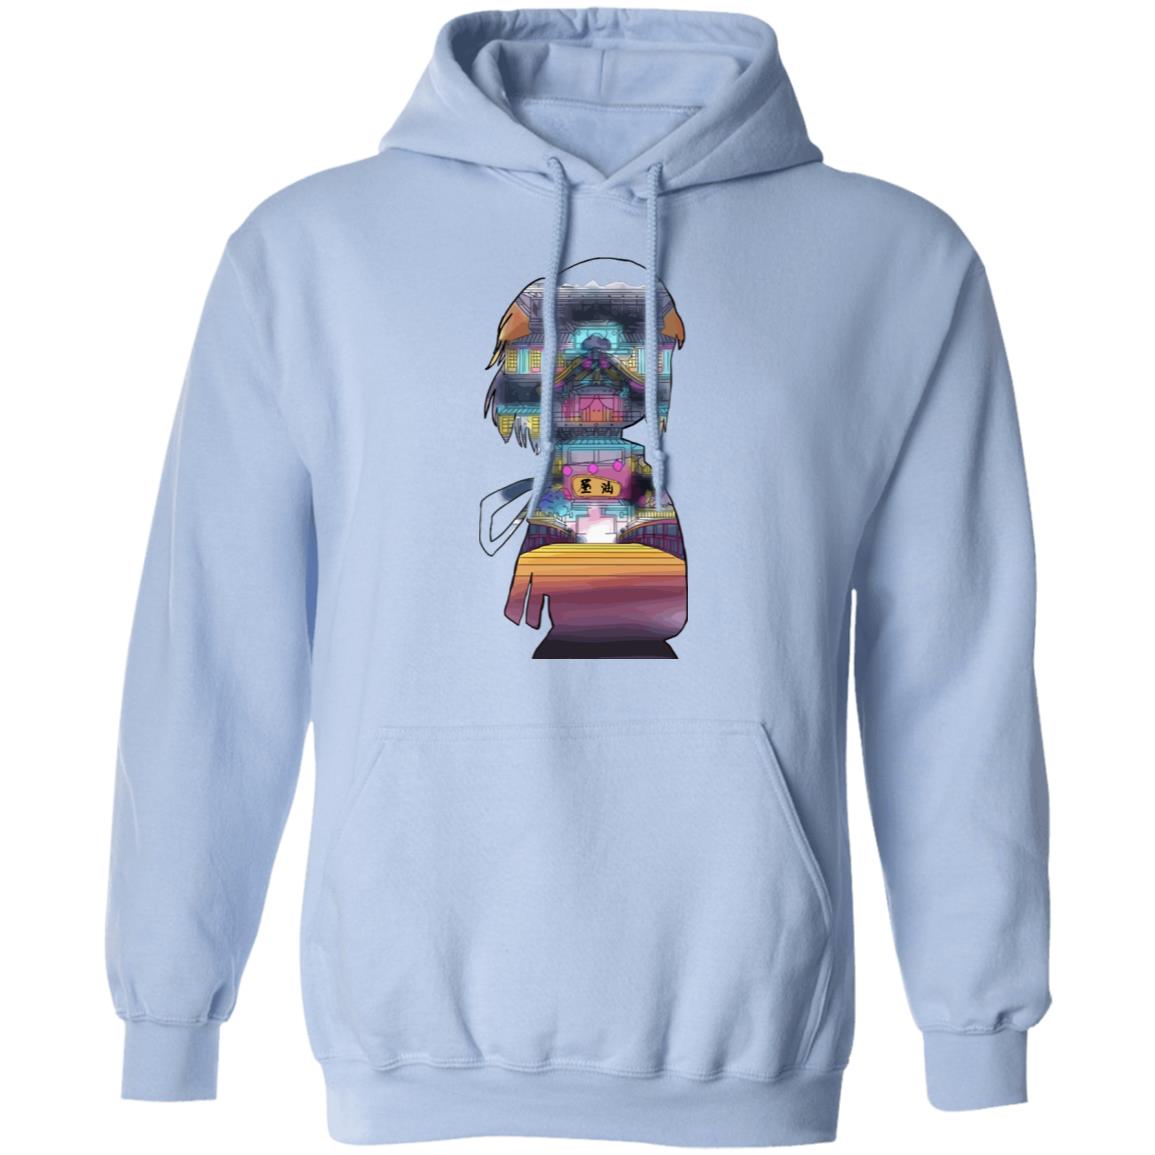 Spirited Away – Sen and The Bathhouse Cutout Colorful Hoodie